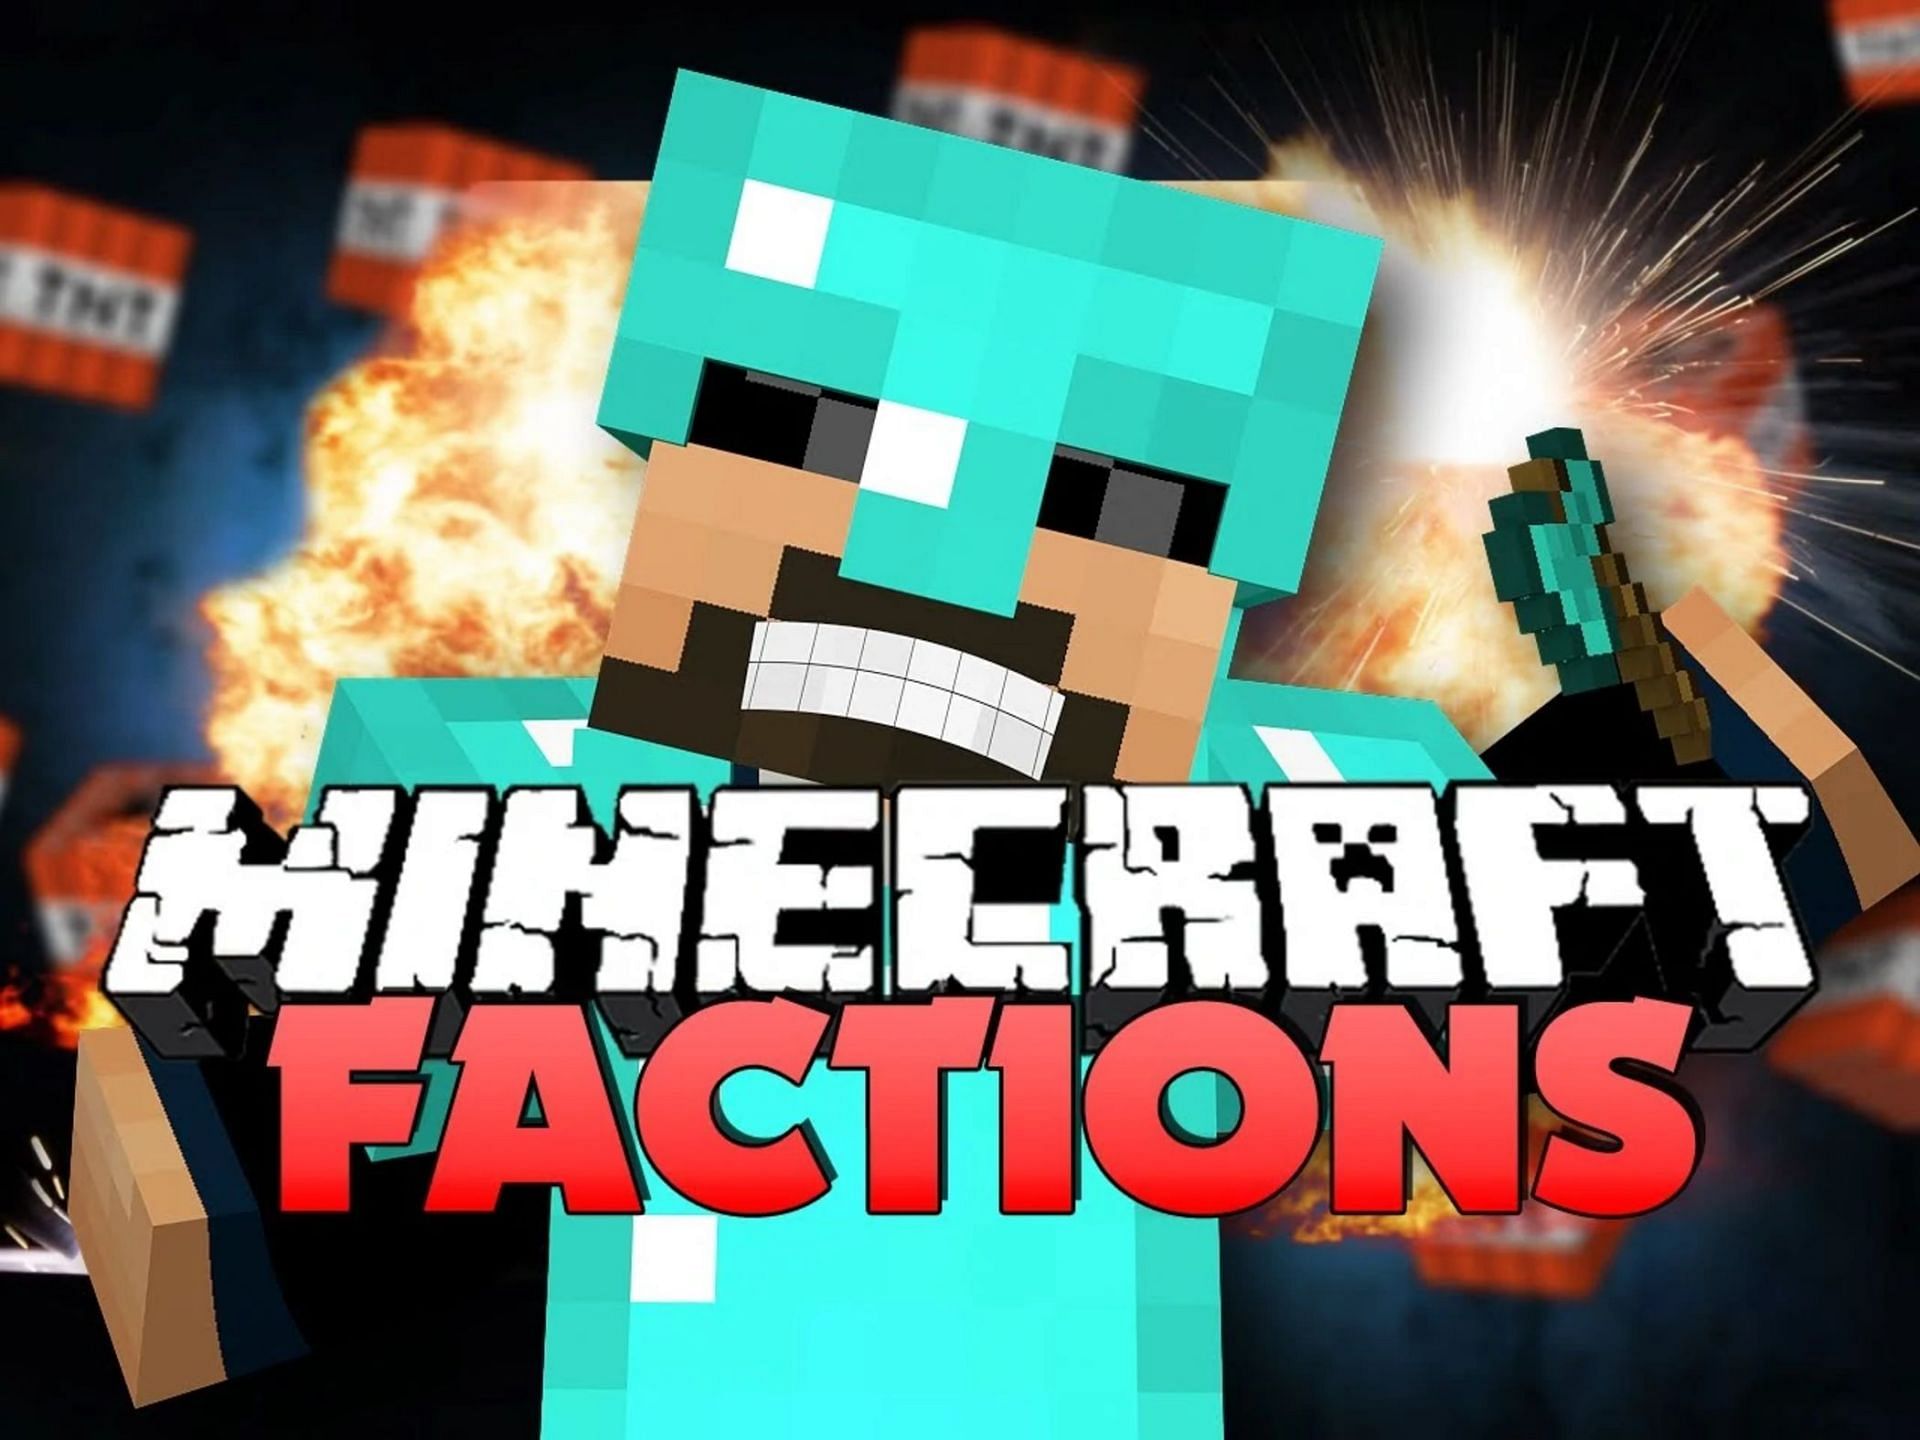 Factions PvP brings large-scale team combat to the fore (Image via mcserversminigames/Fandom)